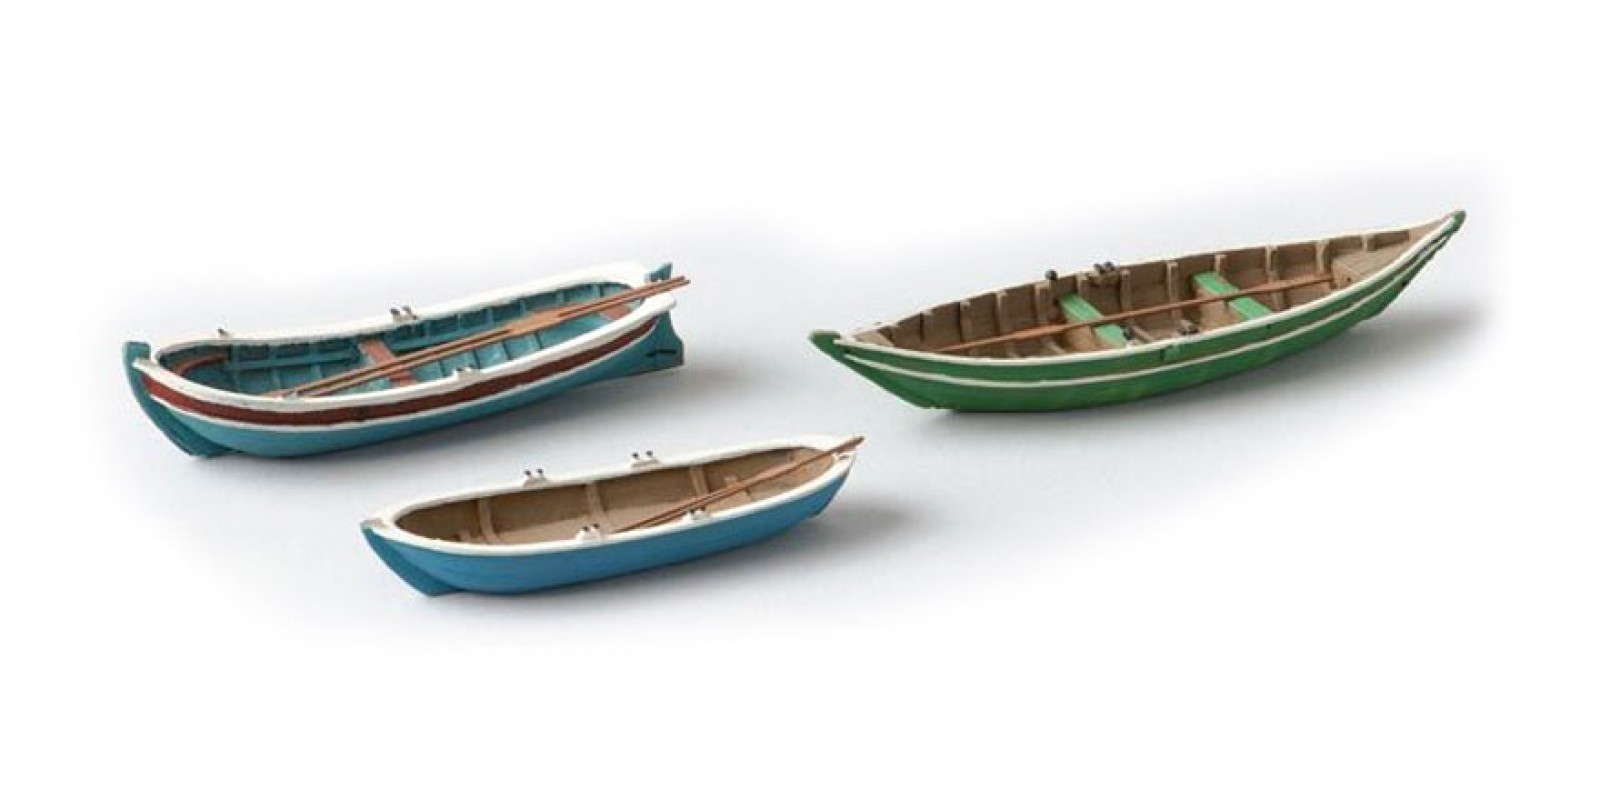 AR387.08 Rowboats 3 pieces, 1:87 resin ready made, painted